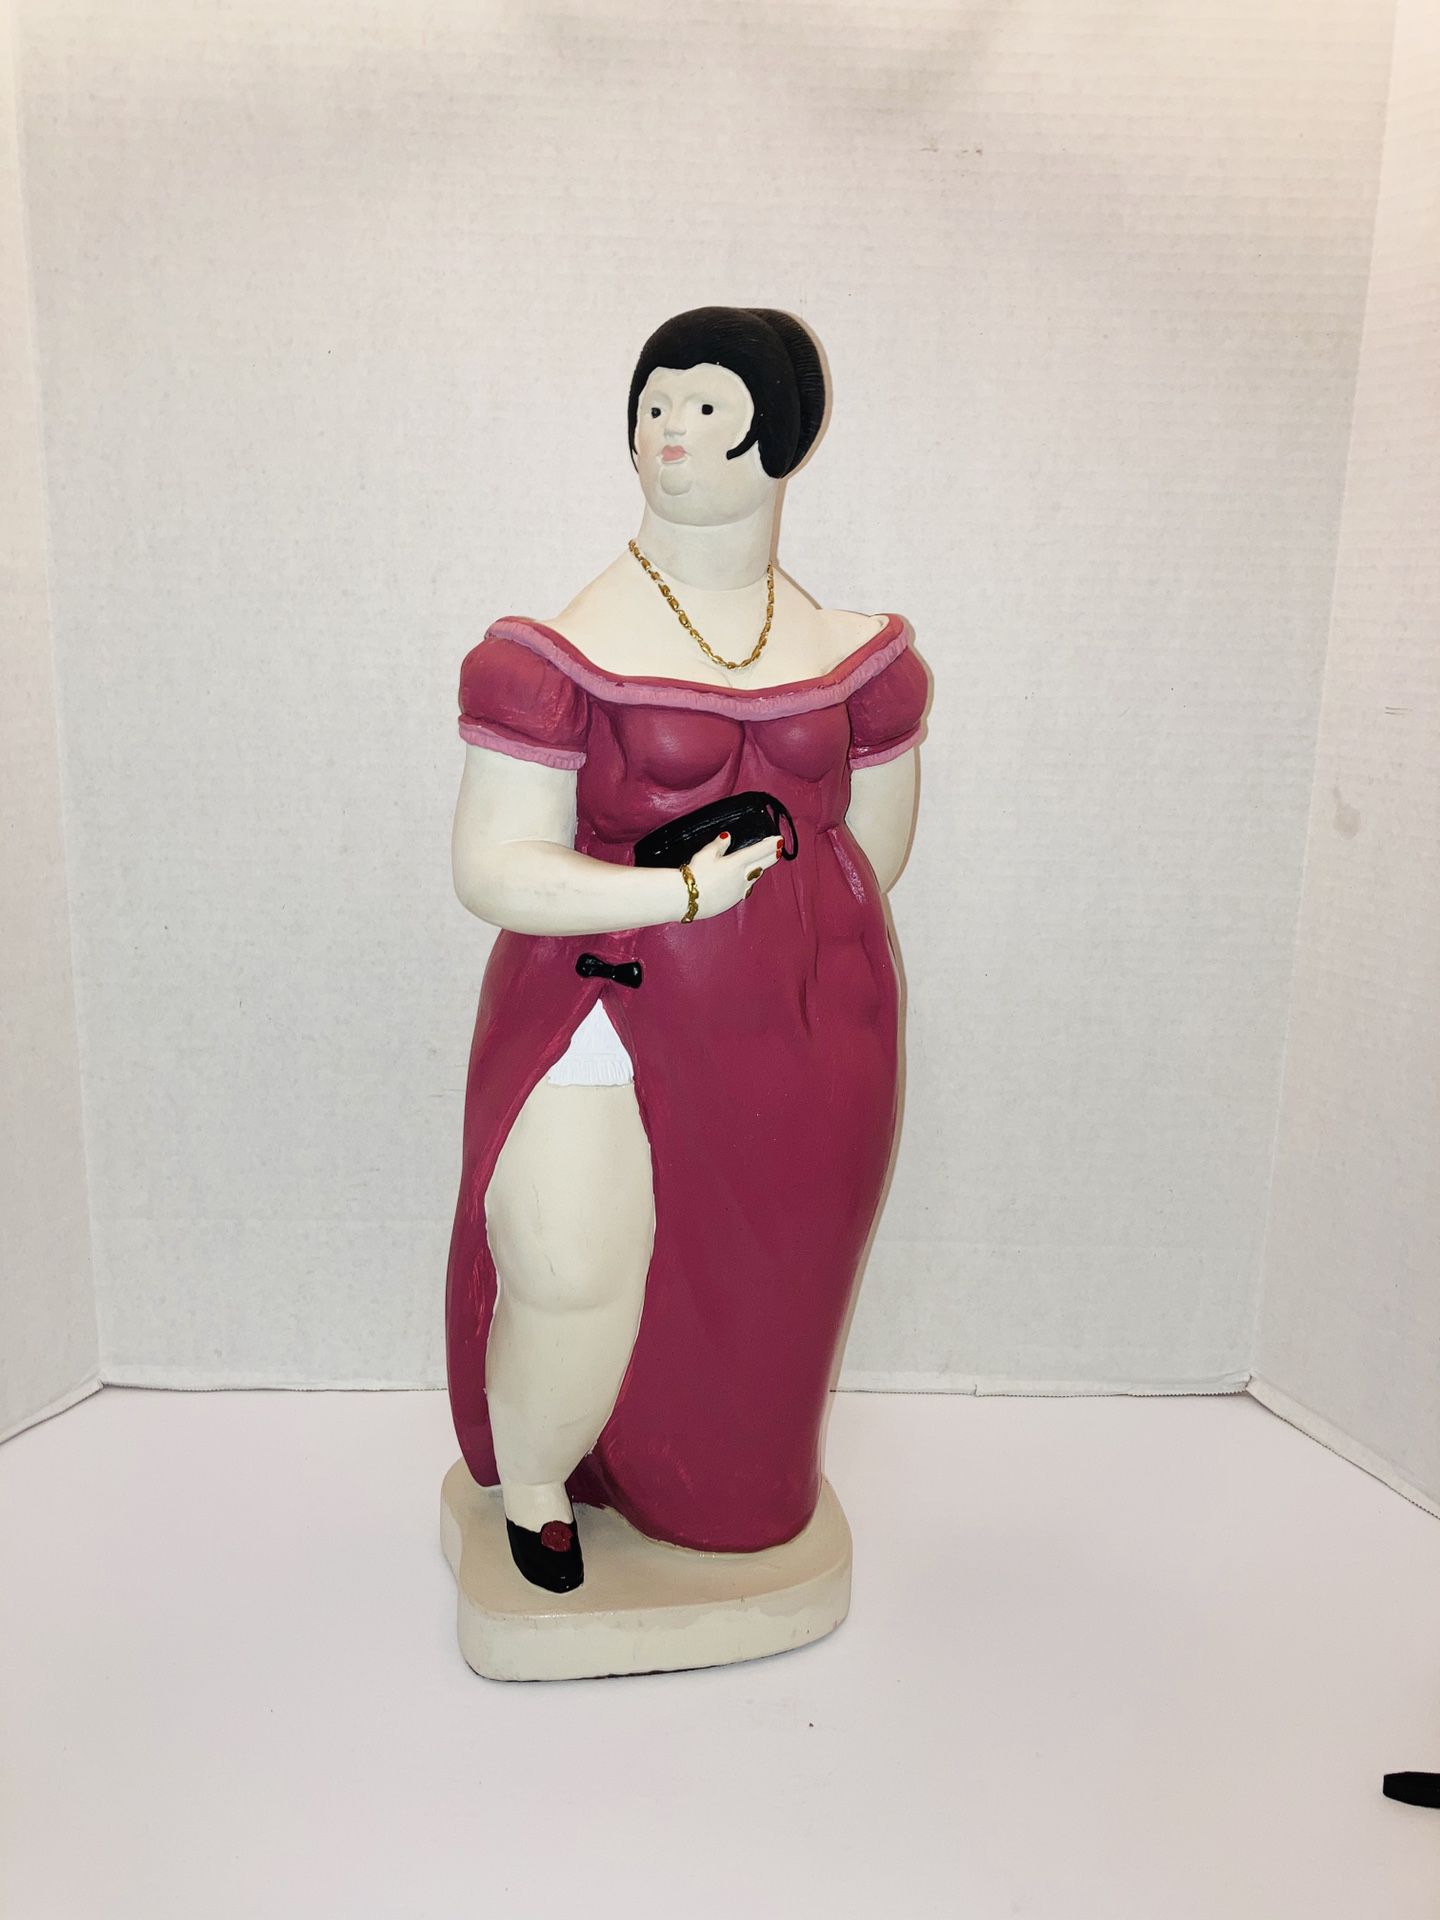 Vintage Rare 1987 Signed Austin Productions, Inc. Artist Paolo Grosso Elegant Gorgeous Woman In Dress Sculpture Statue Collectible